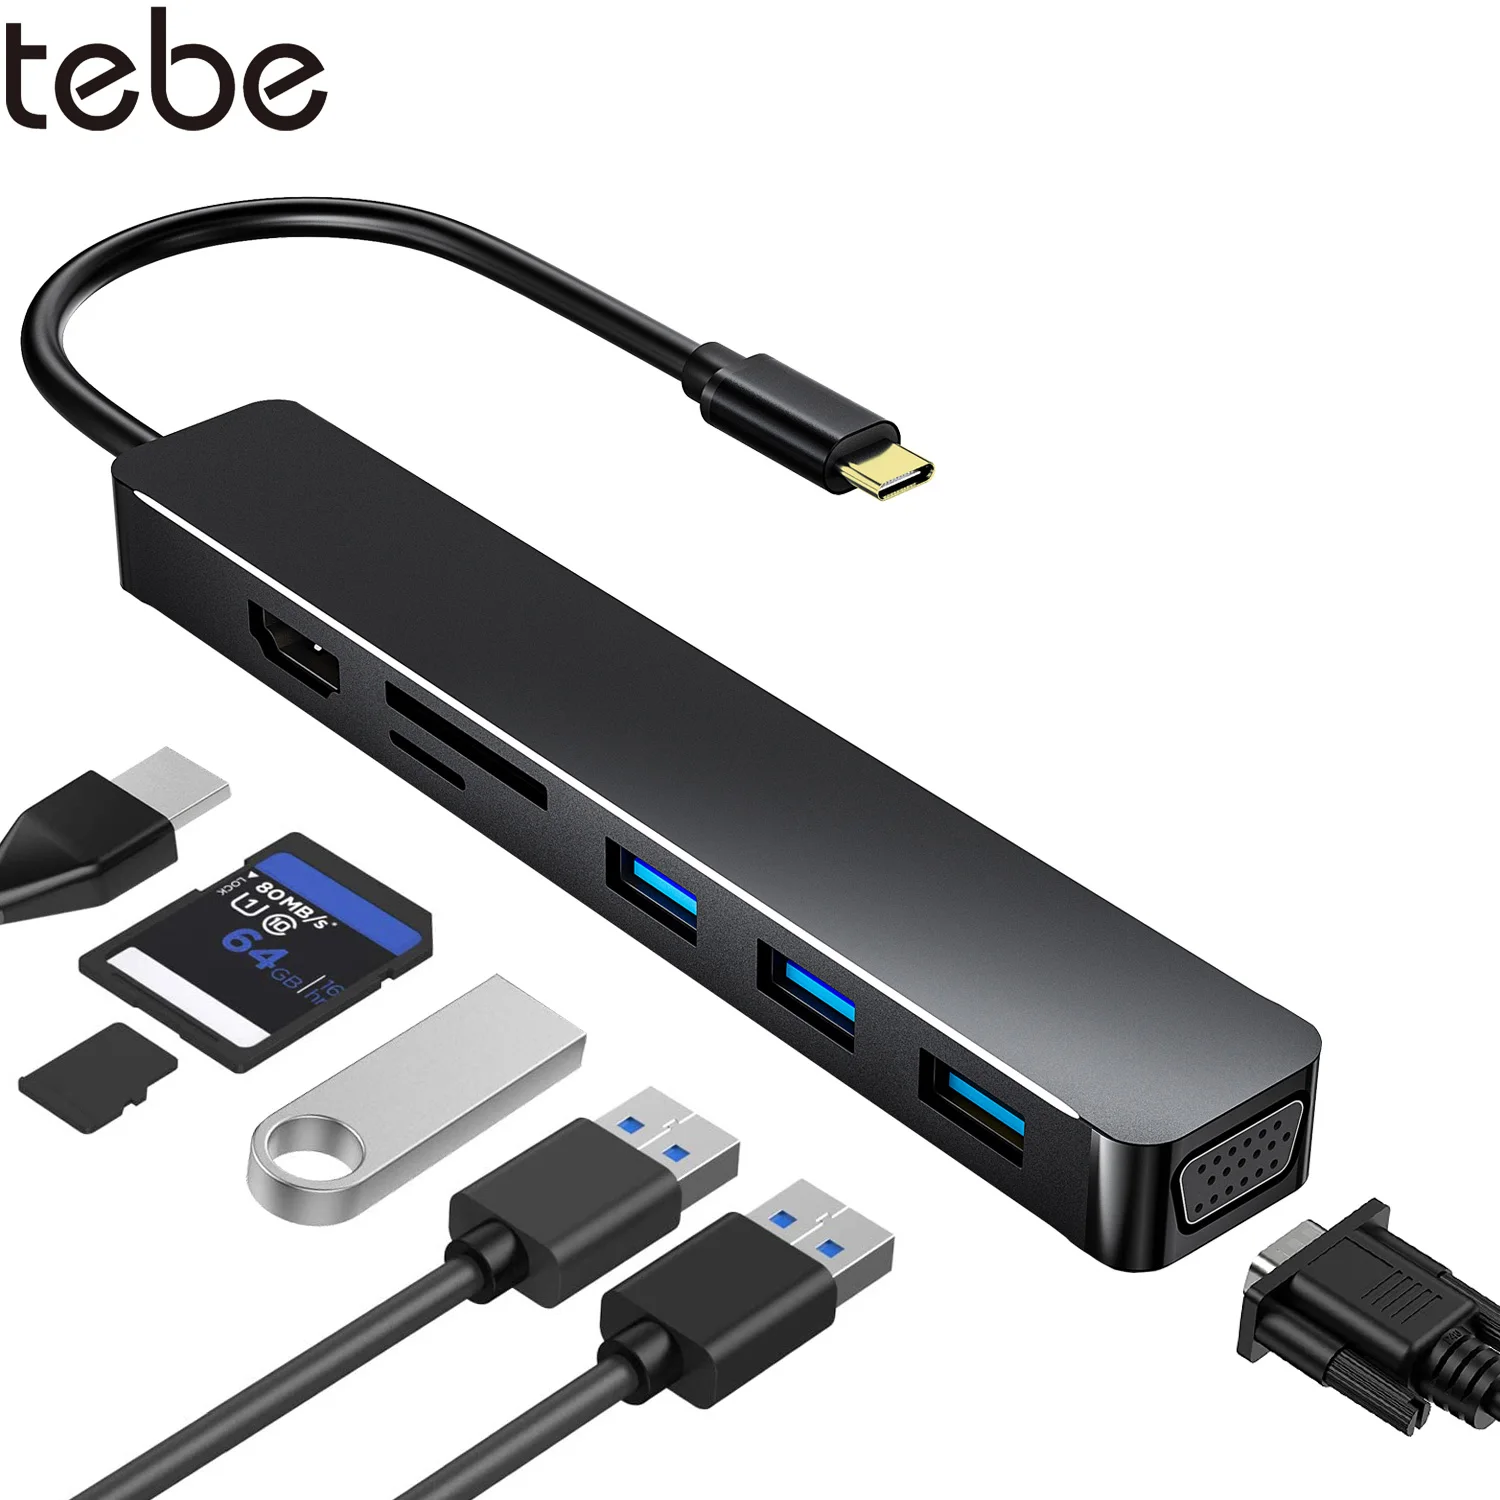 

tebe USB-C HUB Type-c To 4K HDMI-conpatible VGA SD/TF Card Reader 3*USB3.0 PD Fast Charge Splitter Multif Type-c Docking Station